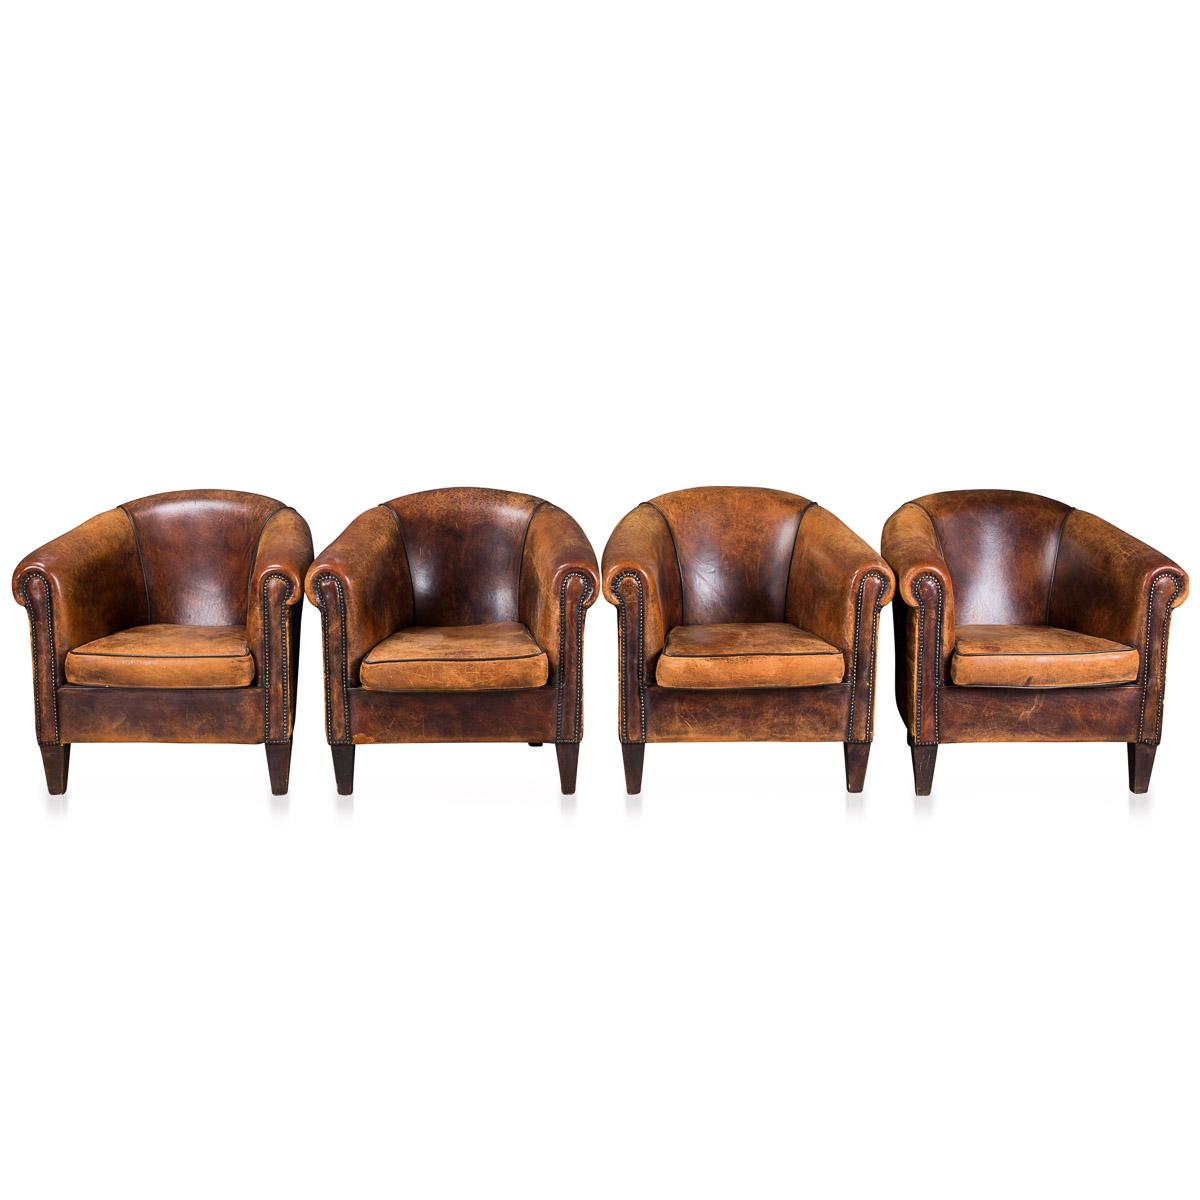 A rare set of four tub chairs, probably Dutch, made in the second half of the 20th century. Upholstered by hand in the finest sheepskin leather, they make a wonderful addition to any home or public space.
 
Condition:

In great condition - some